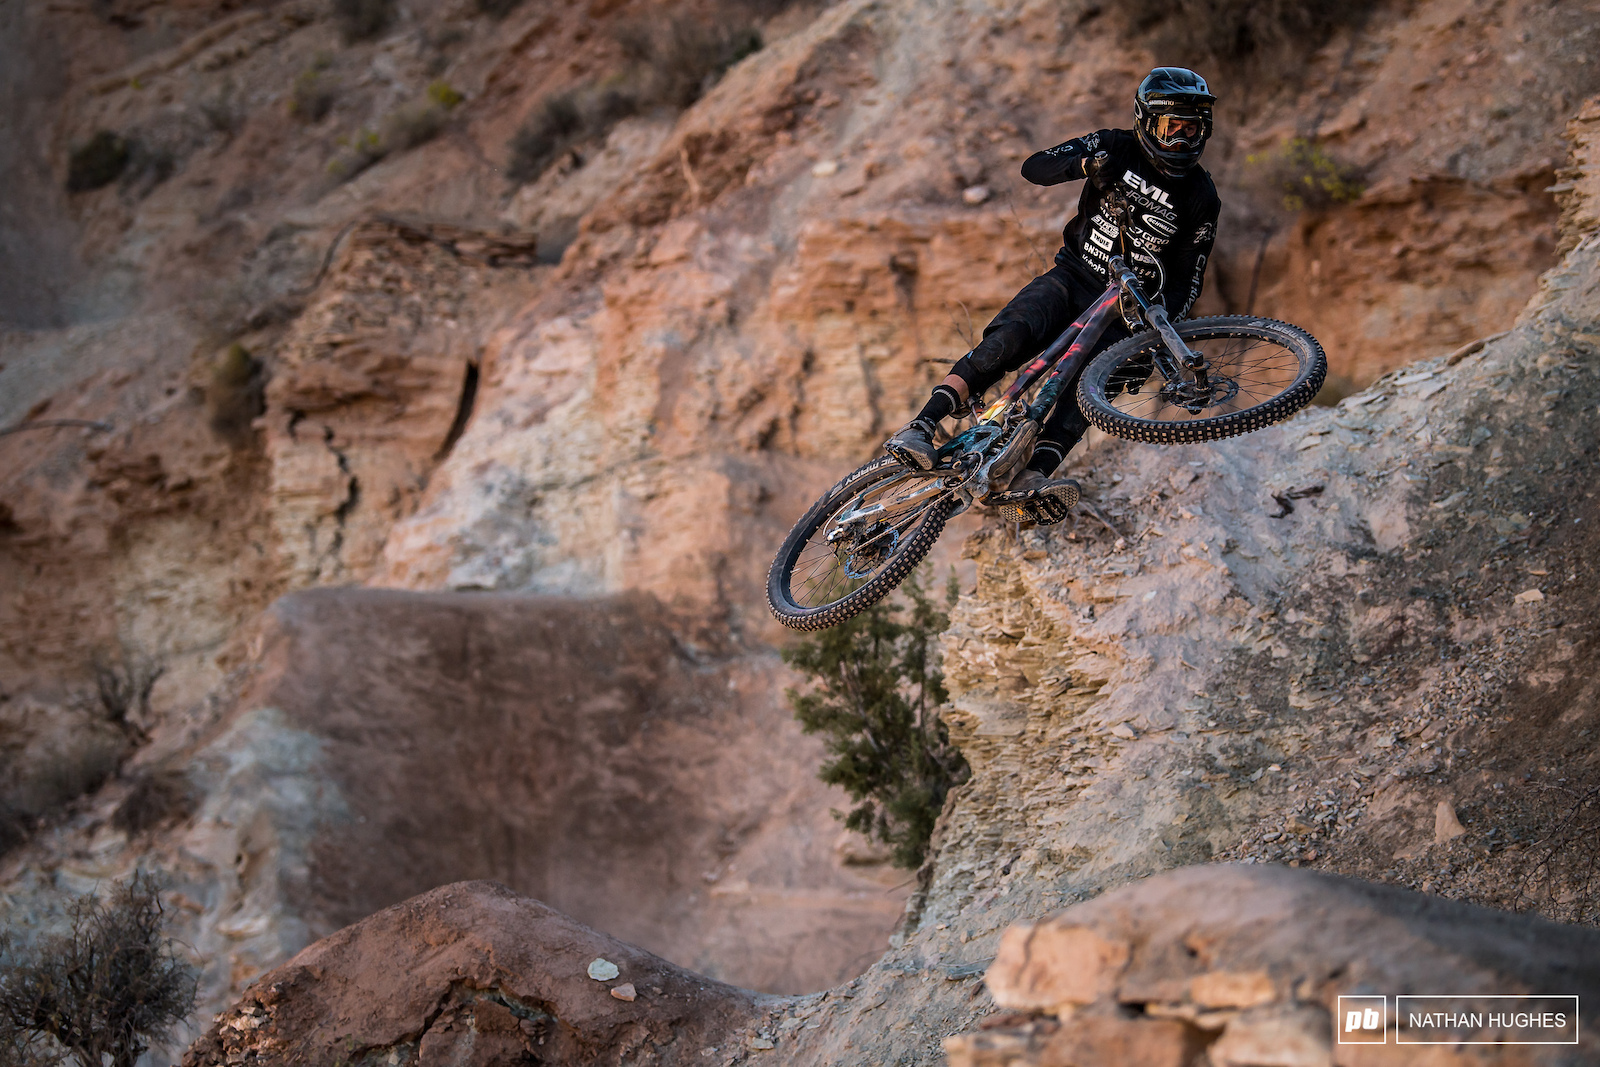 Better believe Kurt Sorge is still hungry for his 4th Rampage win.